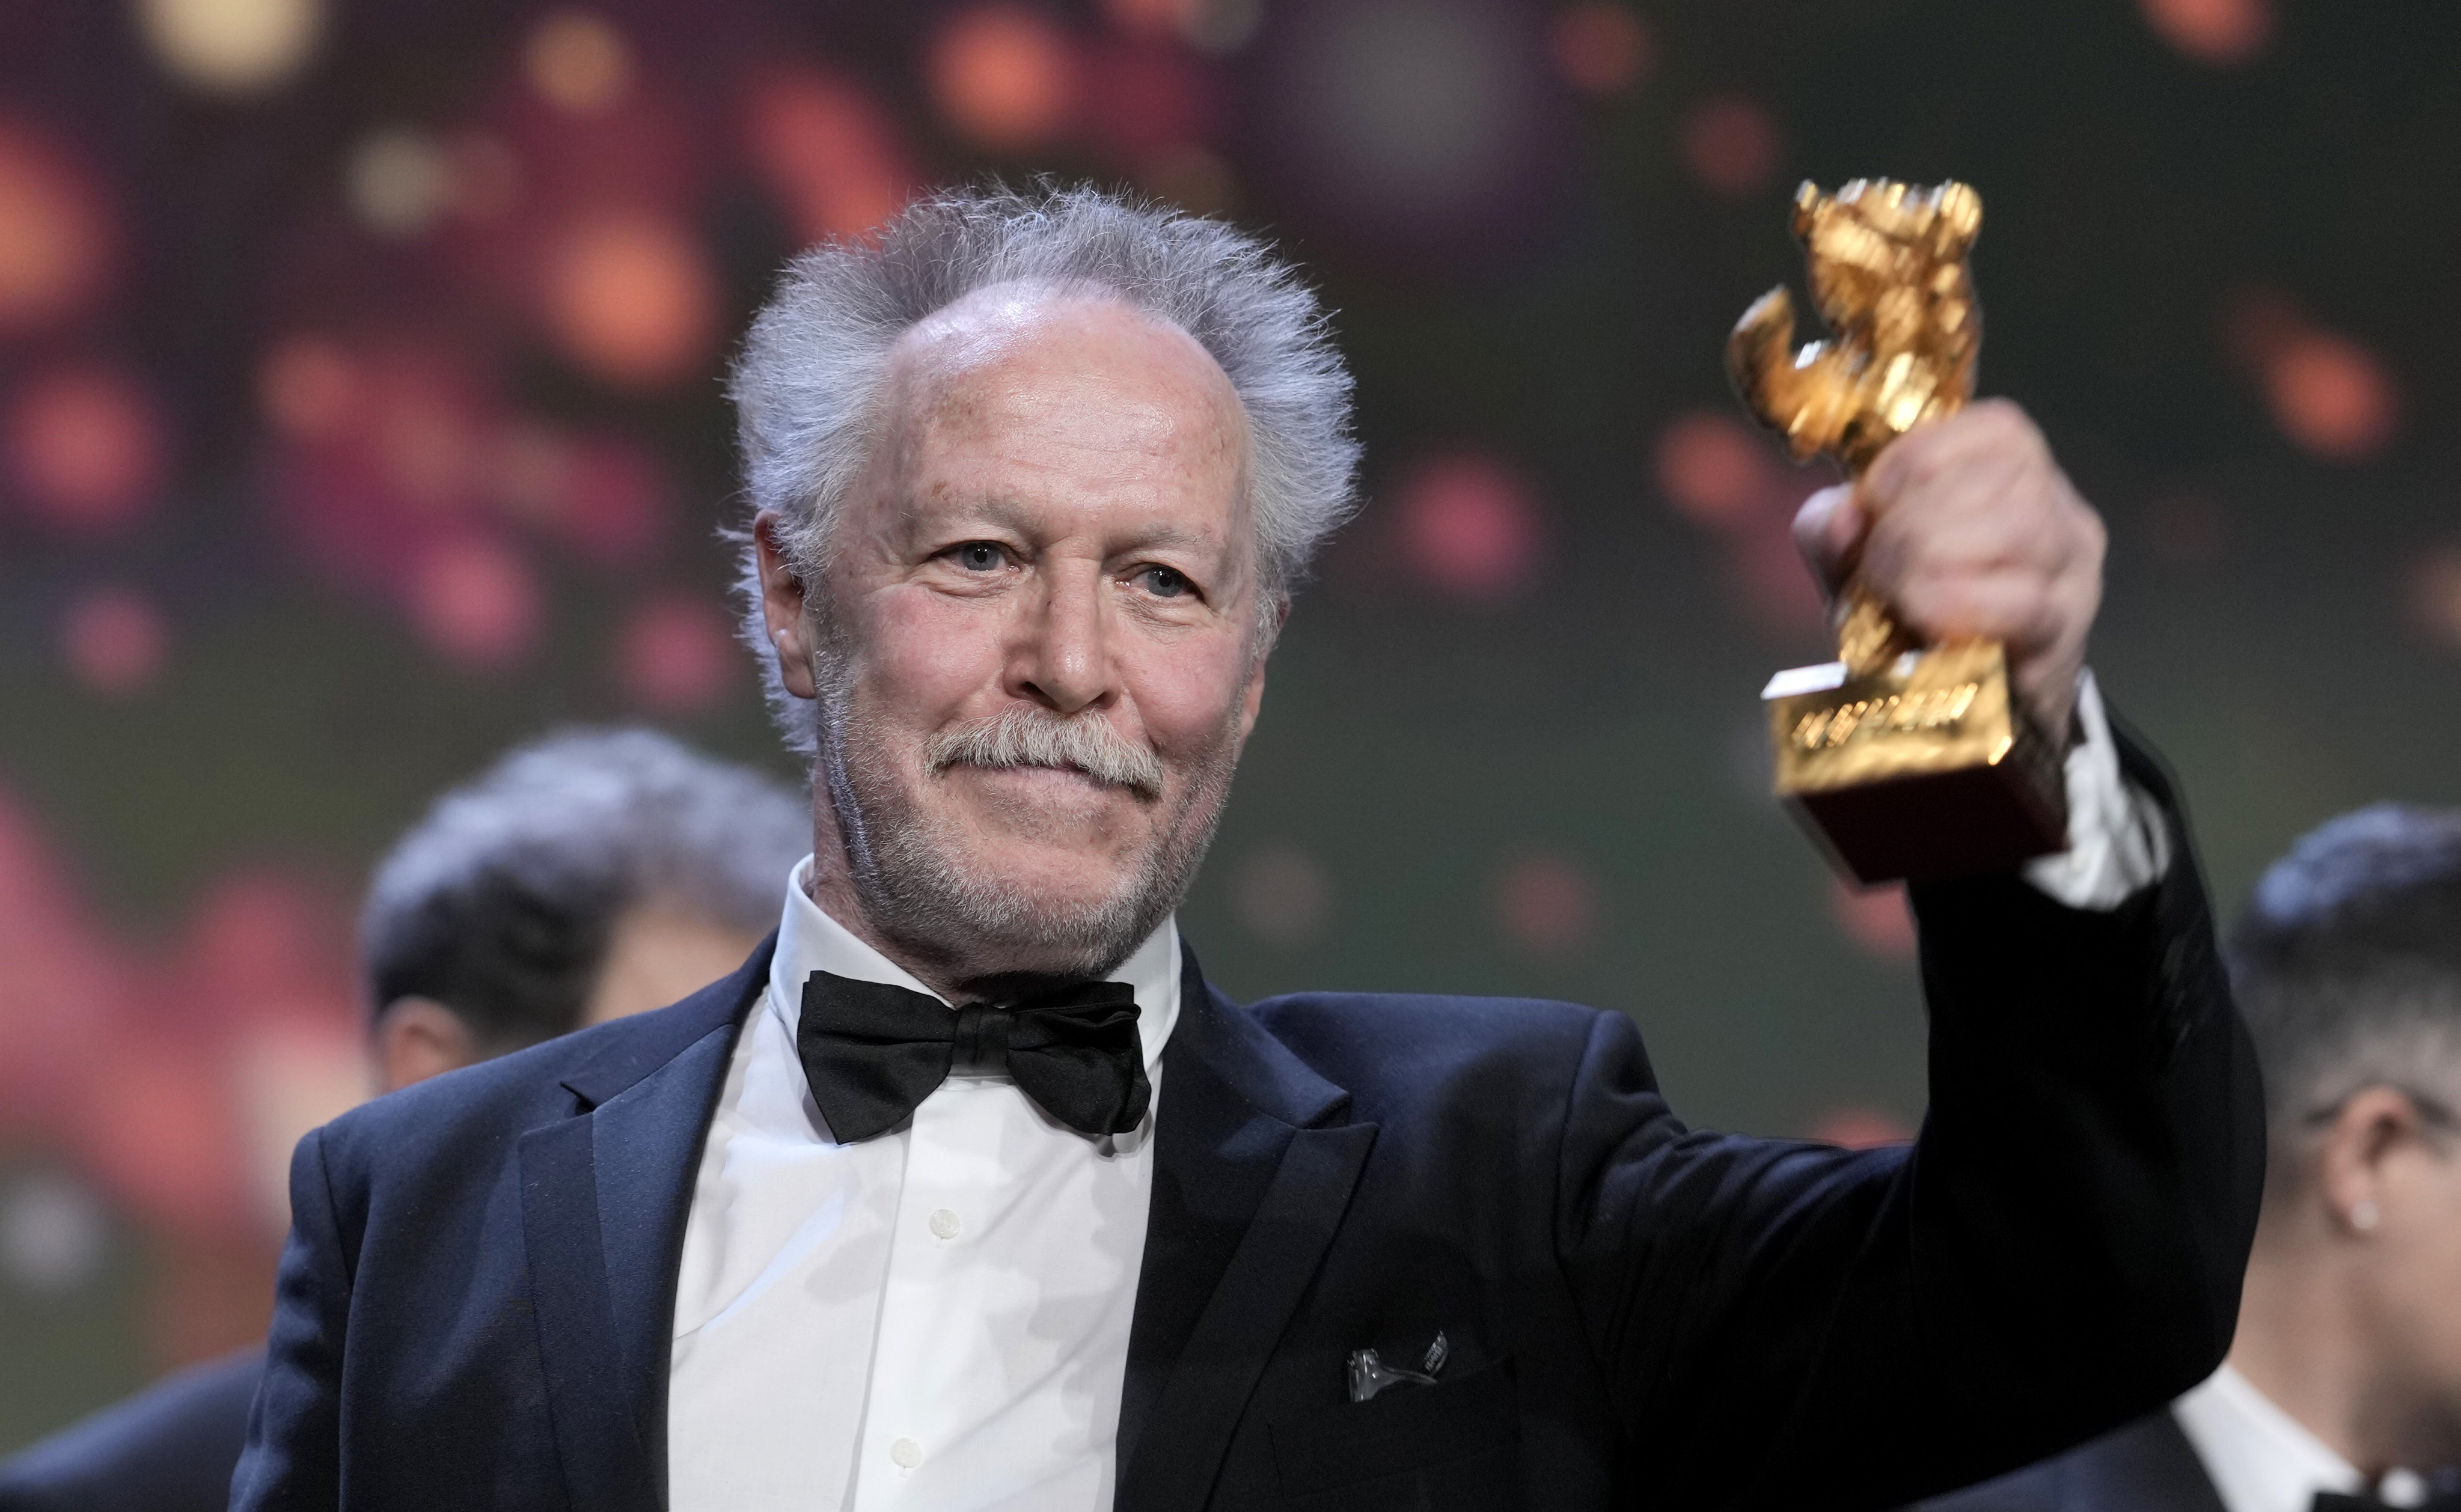 Nicolas Philibert, director of On the Adamant, receives the Golden Bear for best film during the Berlinale film festival in Berlin, Germany on Saturday. Photo: AP